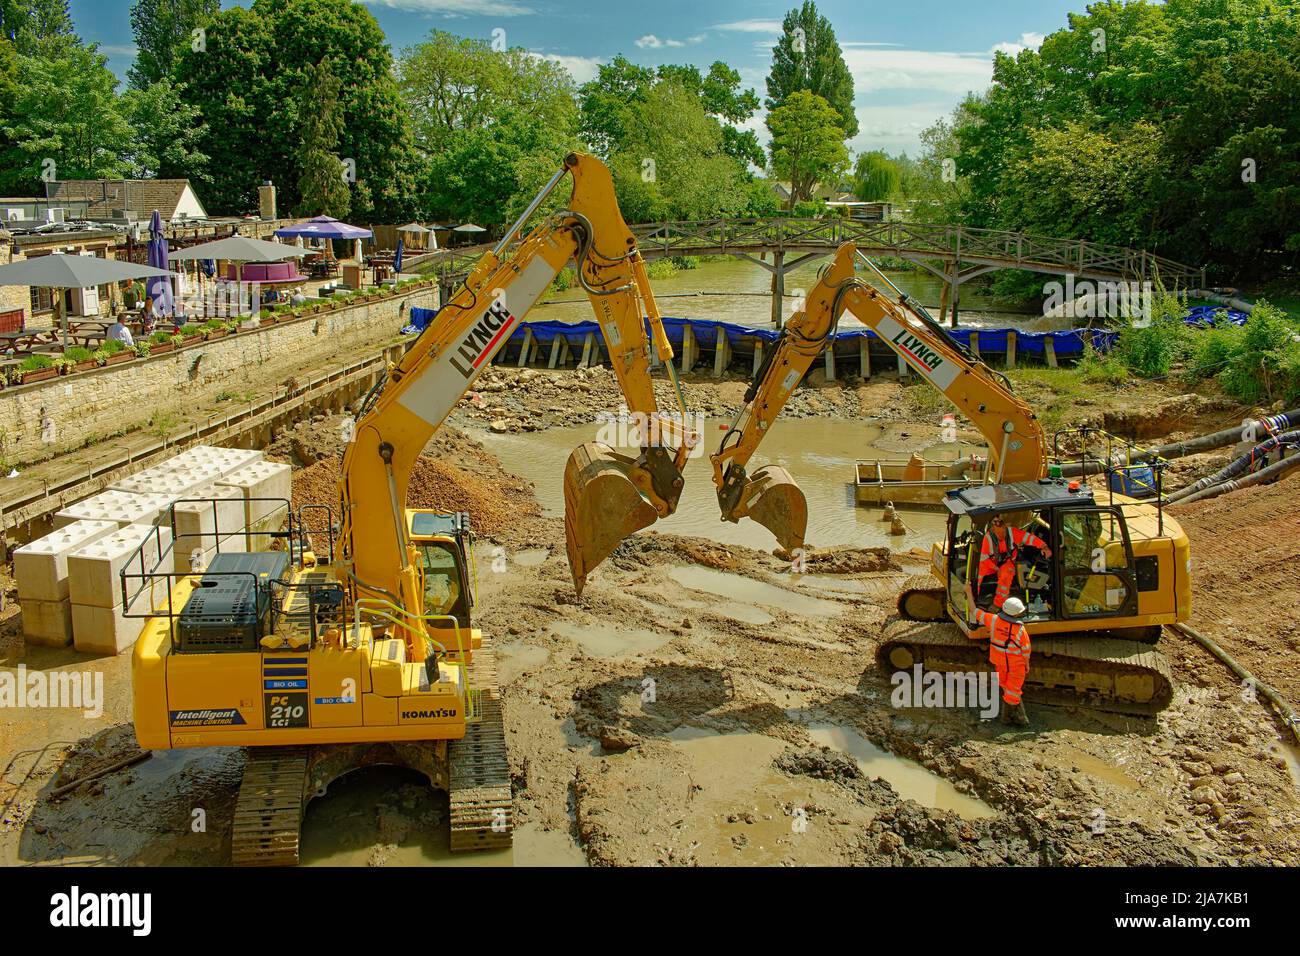 PORT MEADOW OXFORD RECONSTRUCTION OF THE WEIR NEXT TO THE TROUT INN ON THE RIVER THAMES IN SPRING Stock Photo